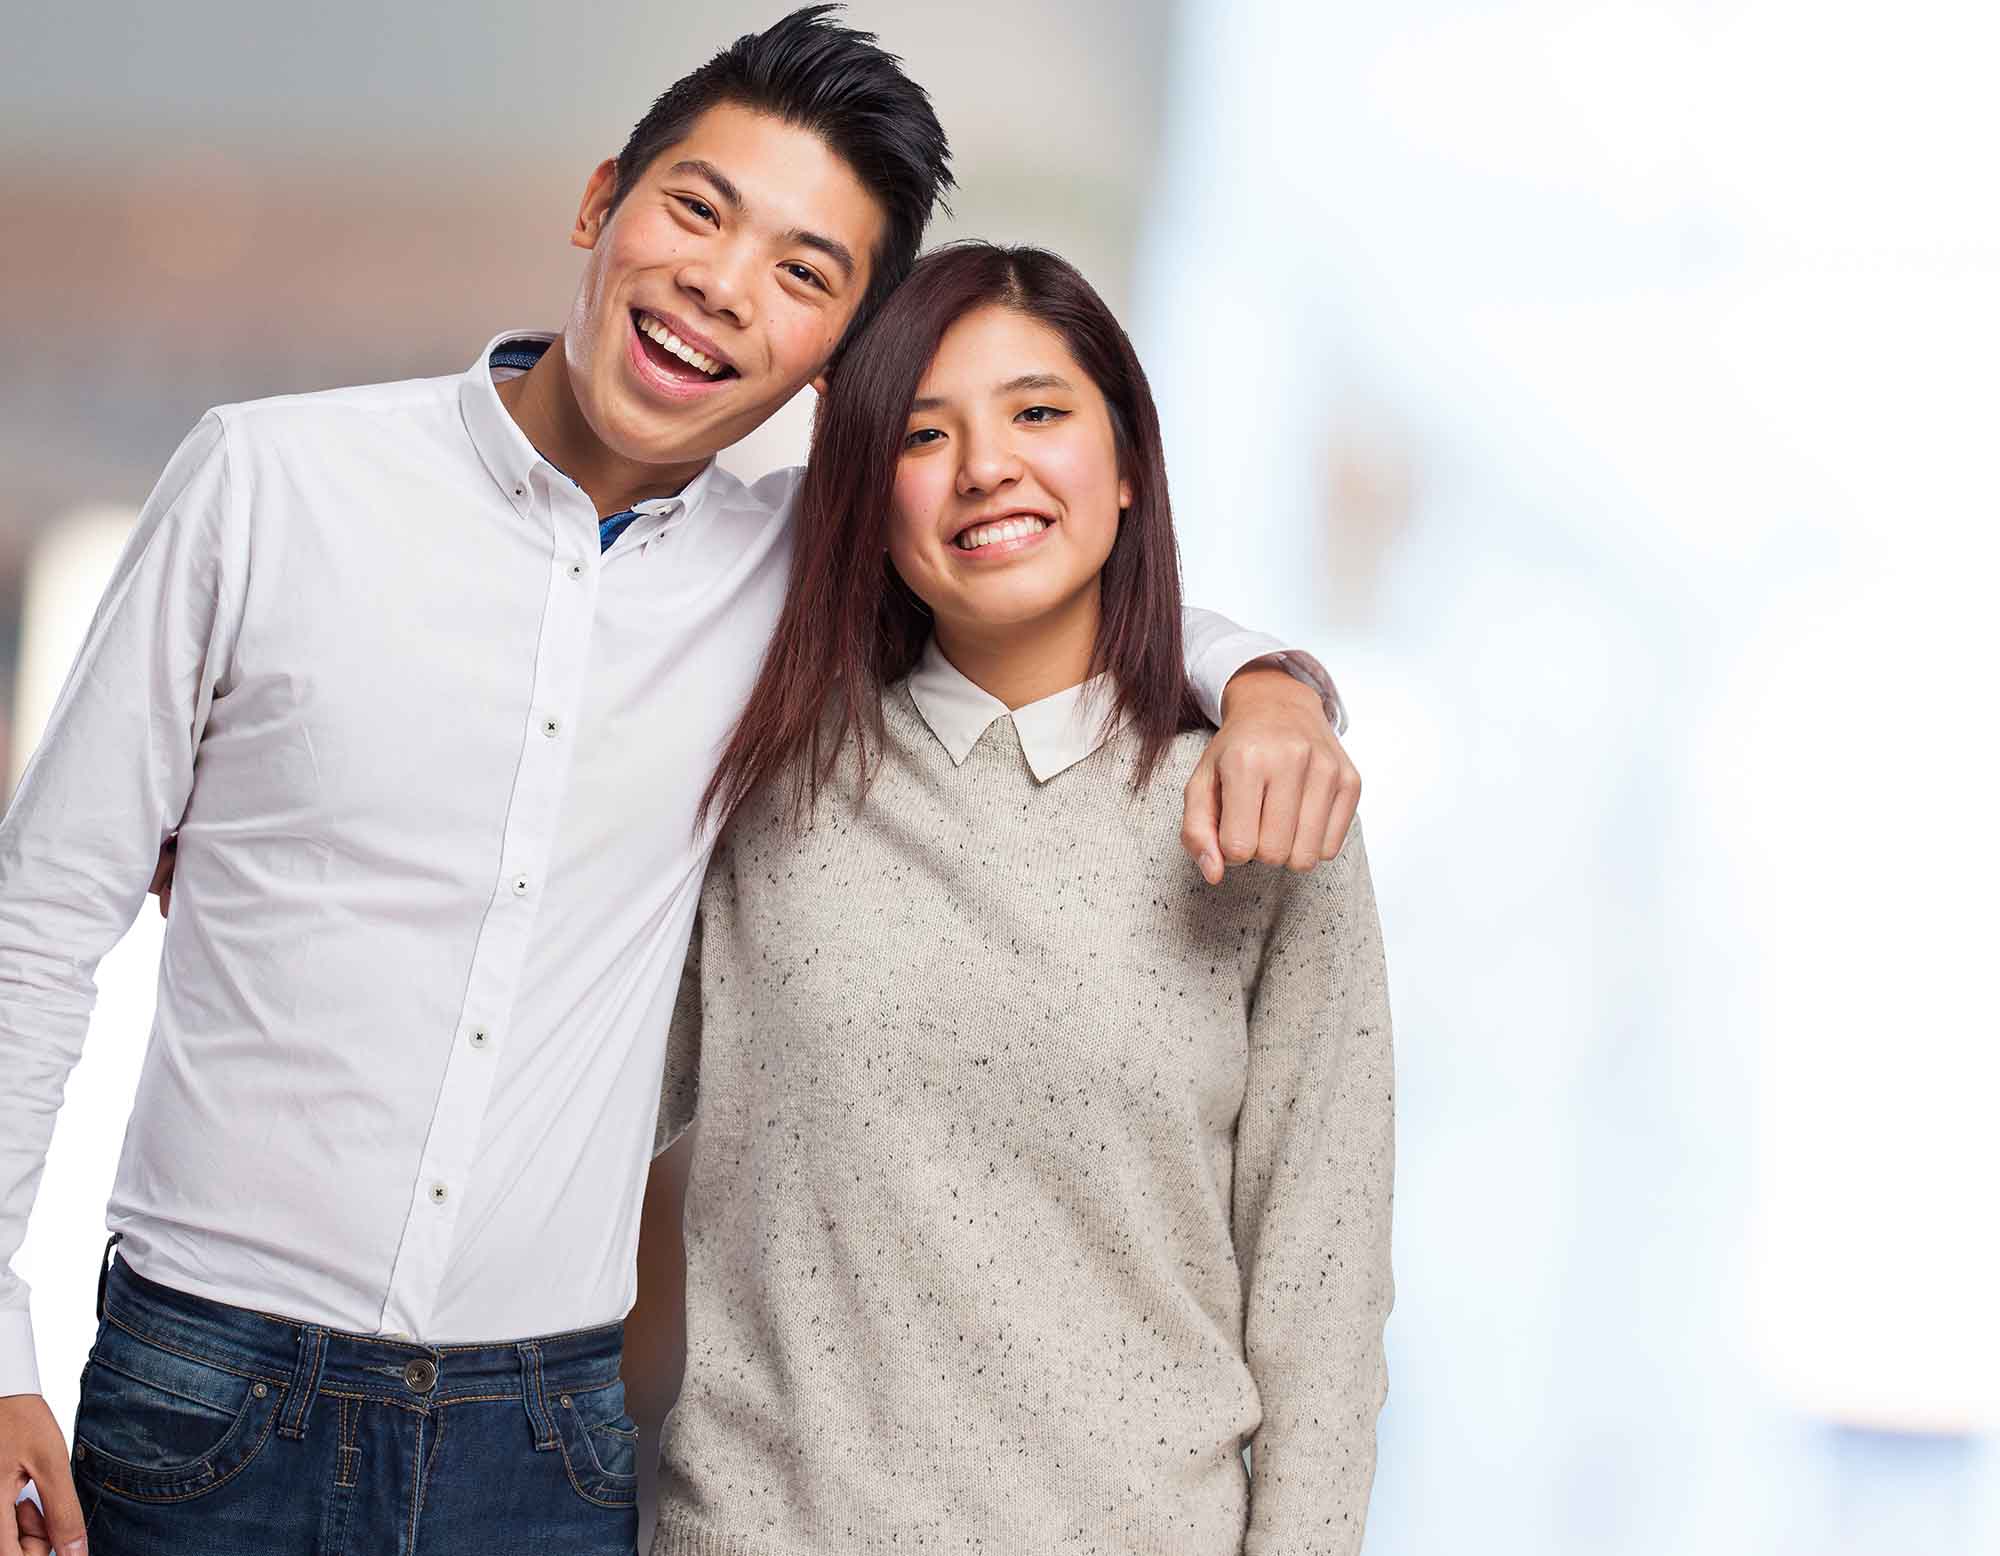 Smiling young couple in a comfortable, sustainable home